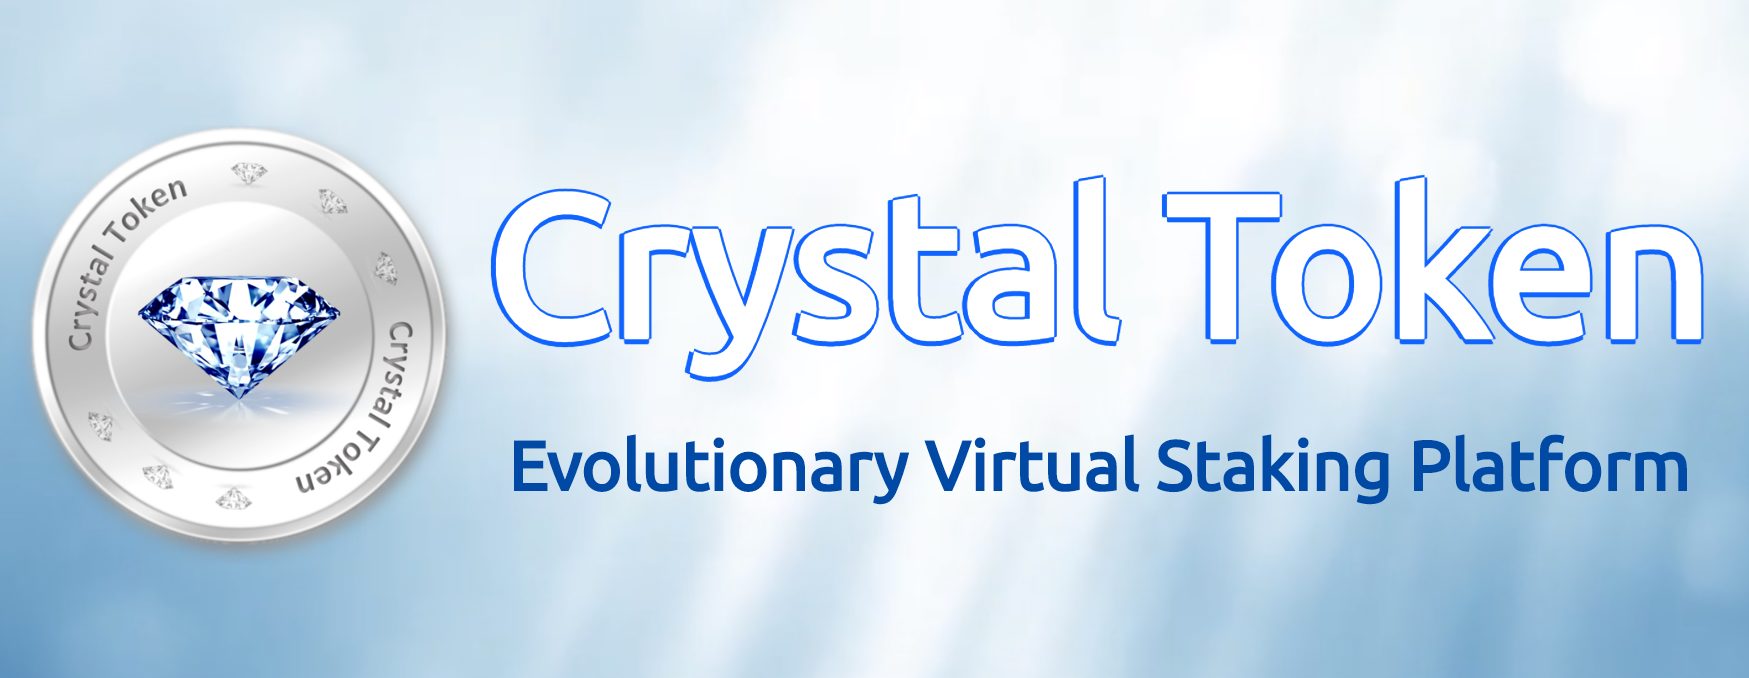 Crystal Token: ICO Review